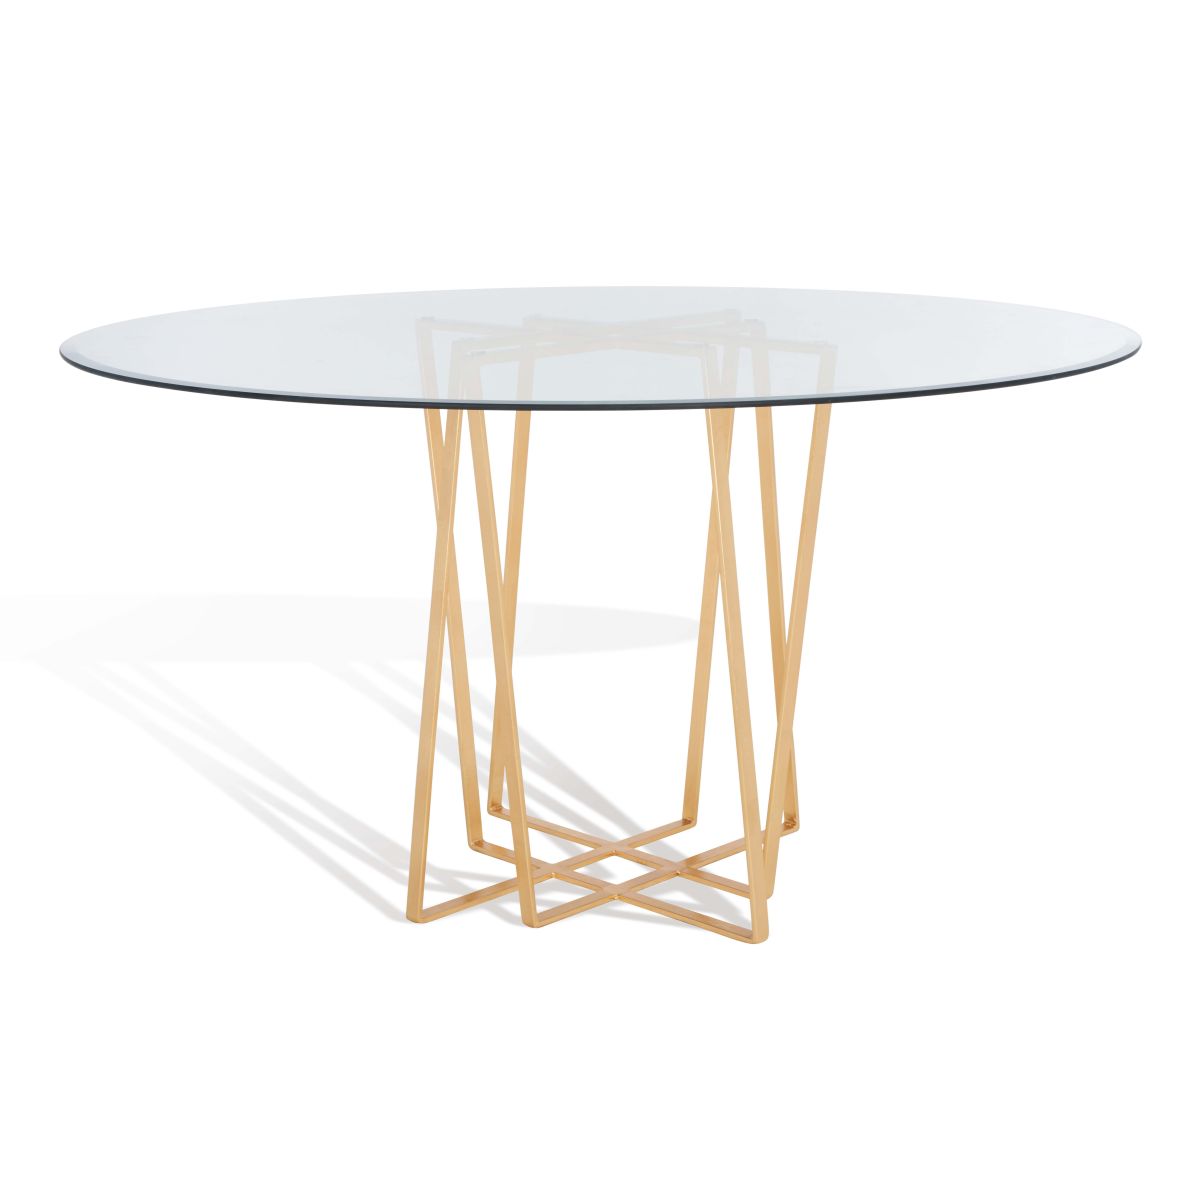 Safavieh Couture Scotty Metal And Glass Dining Table